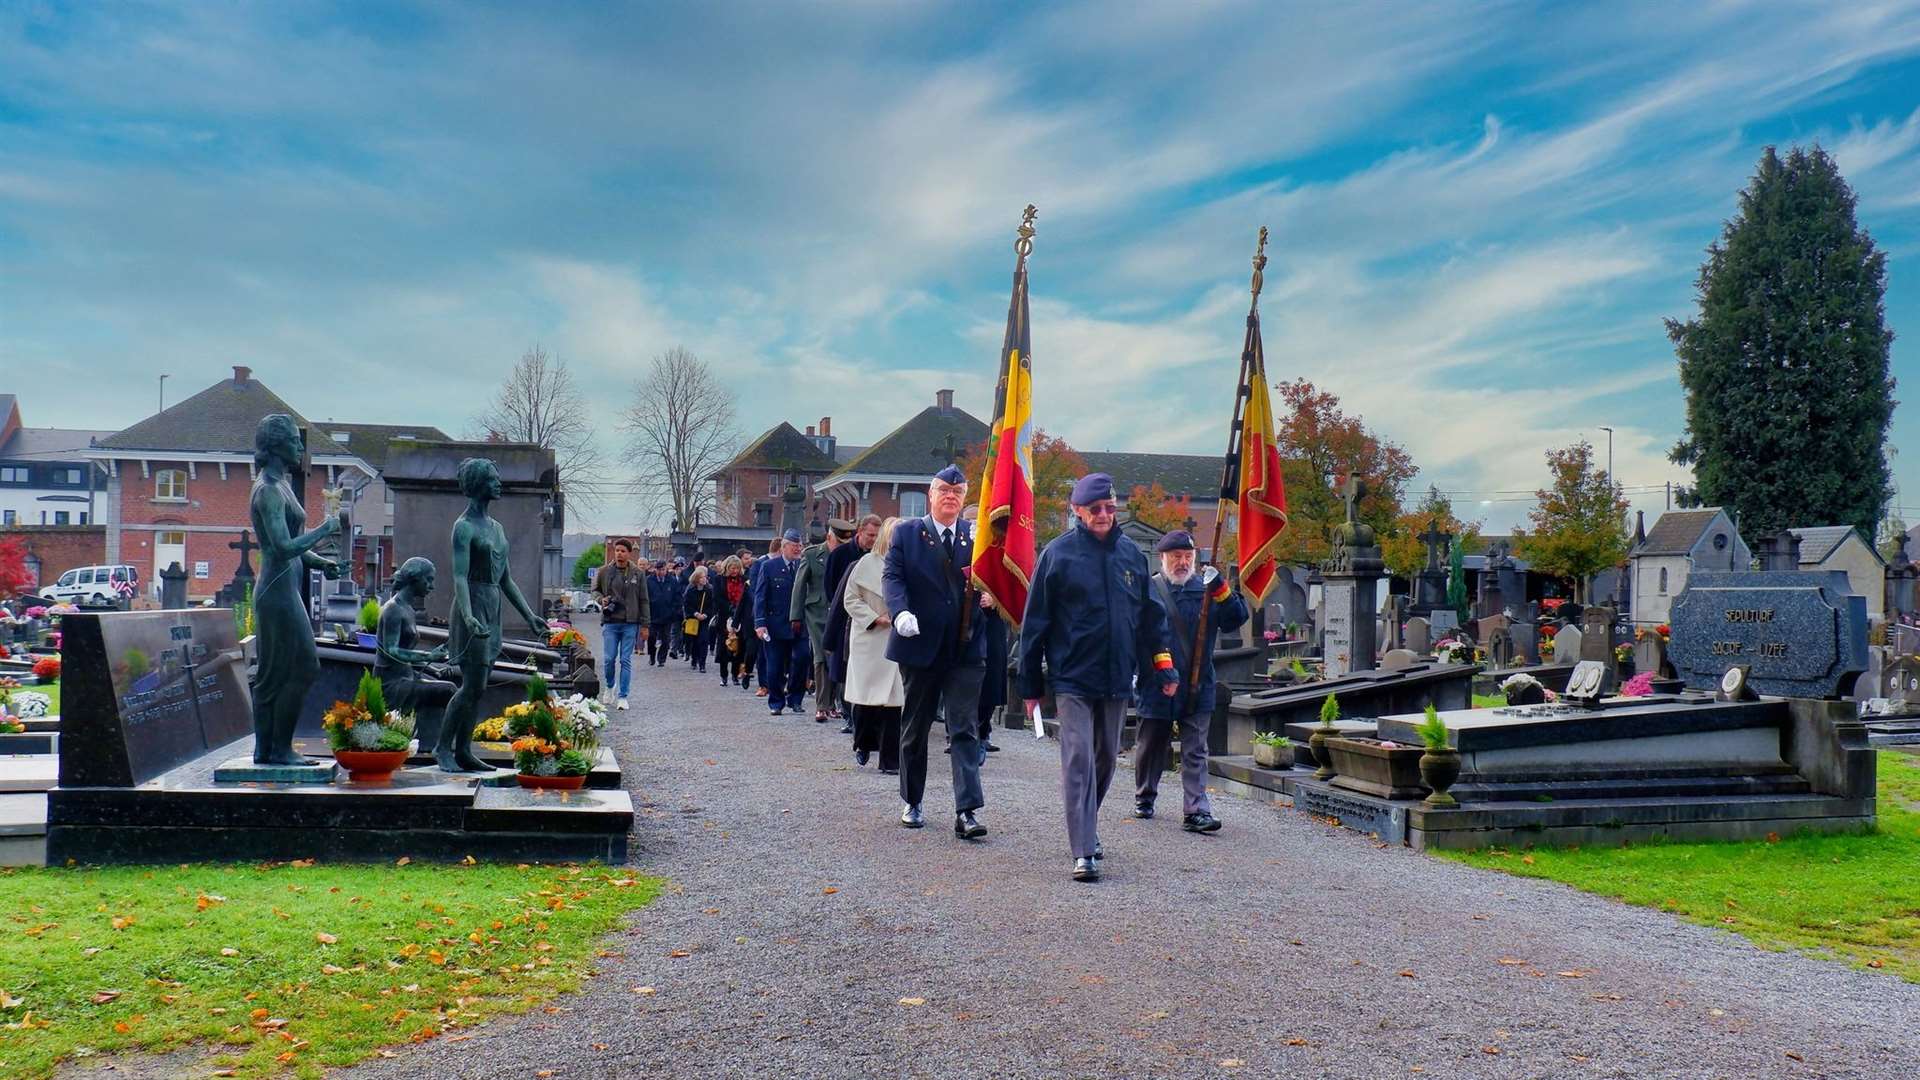 The Belgians parade to Pte Carter's graveside in Namur